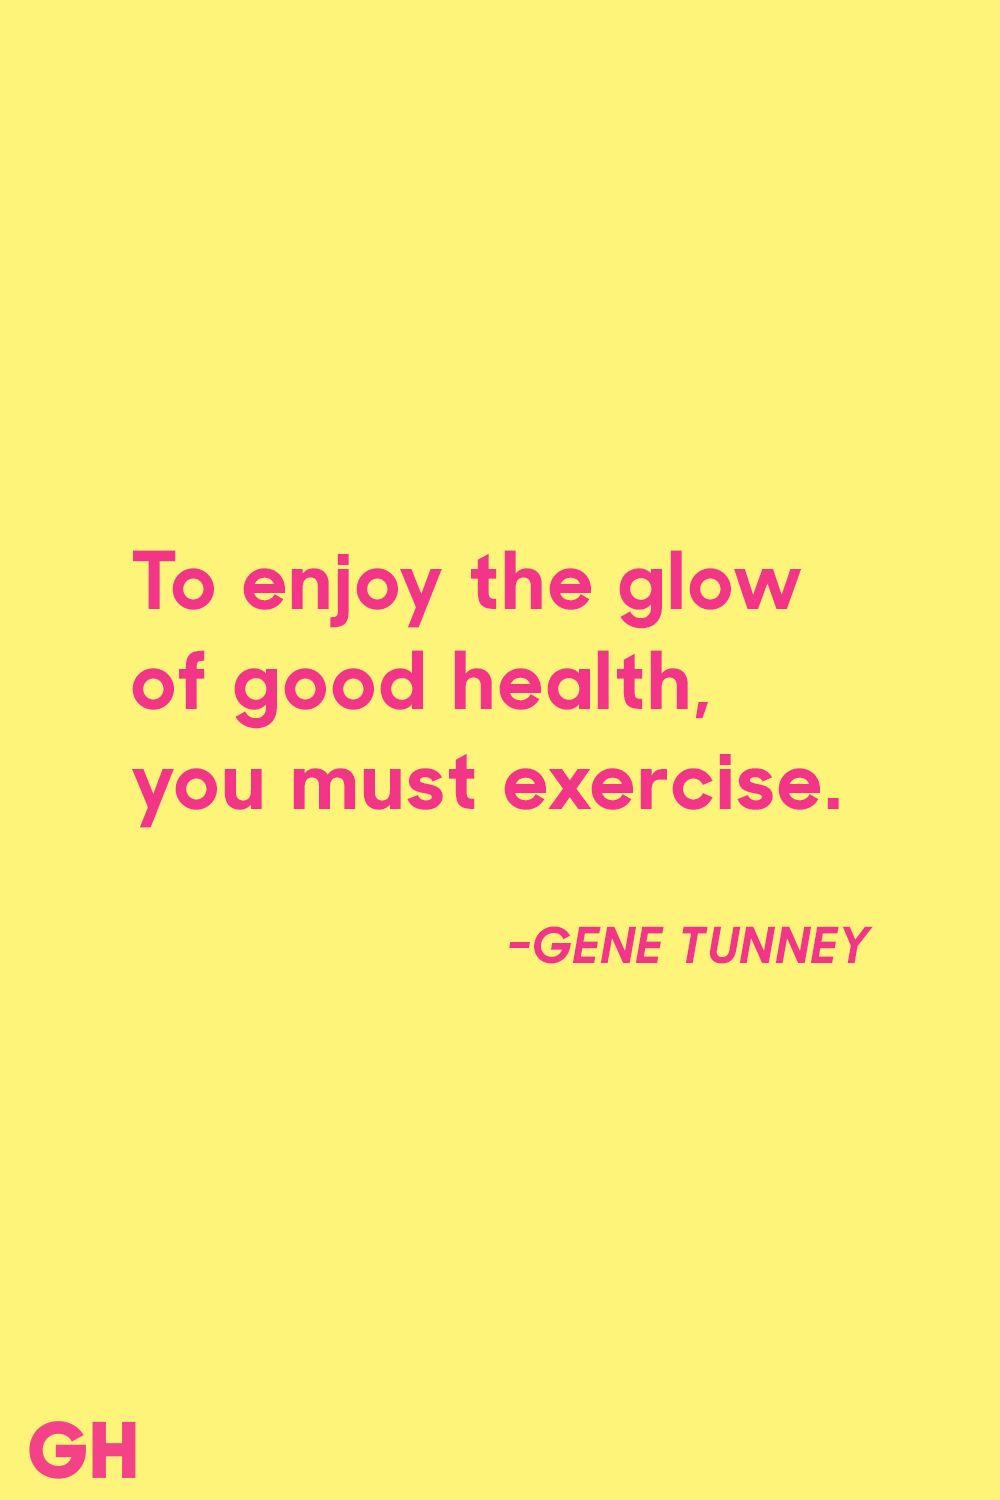 motivational quotes to eat healthy